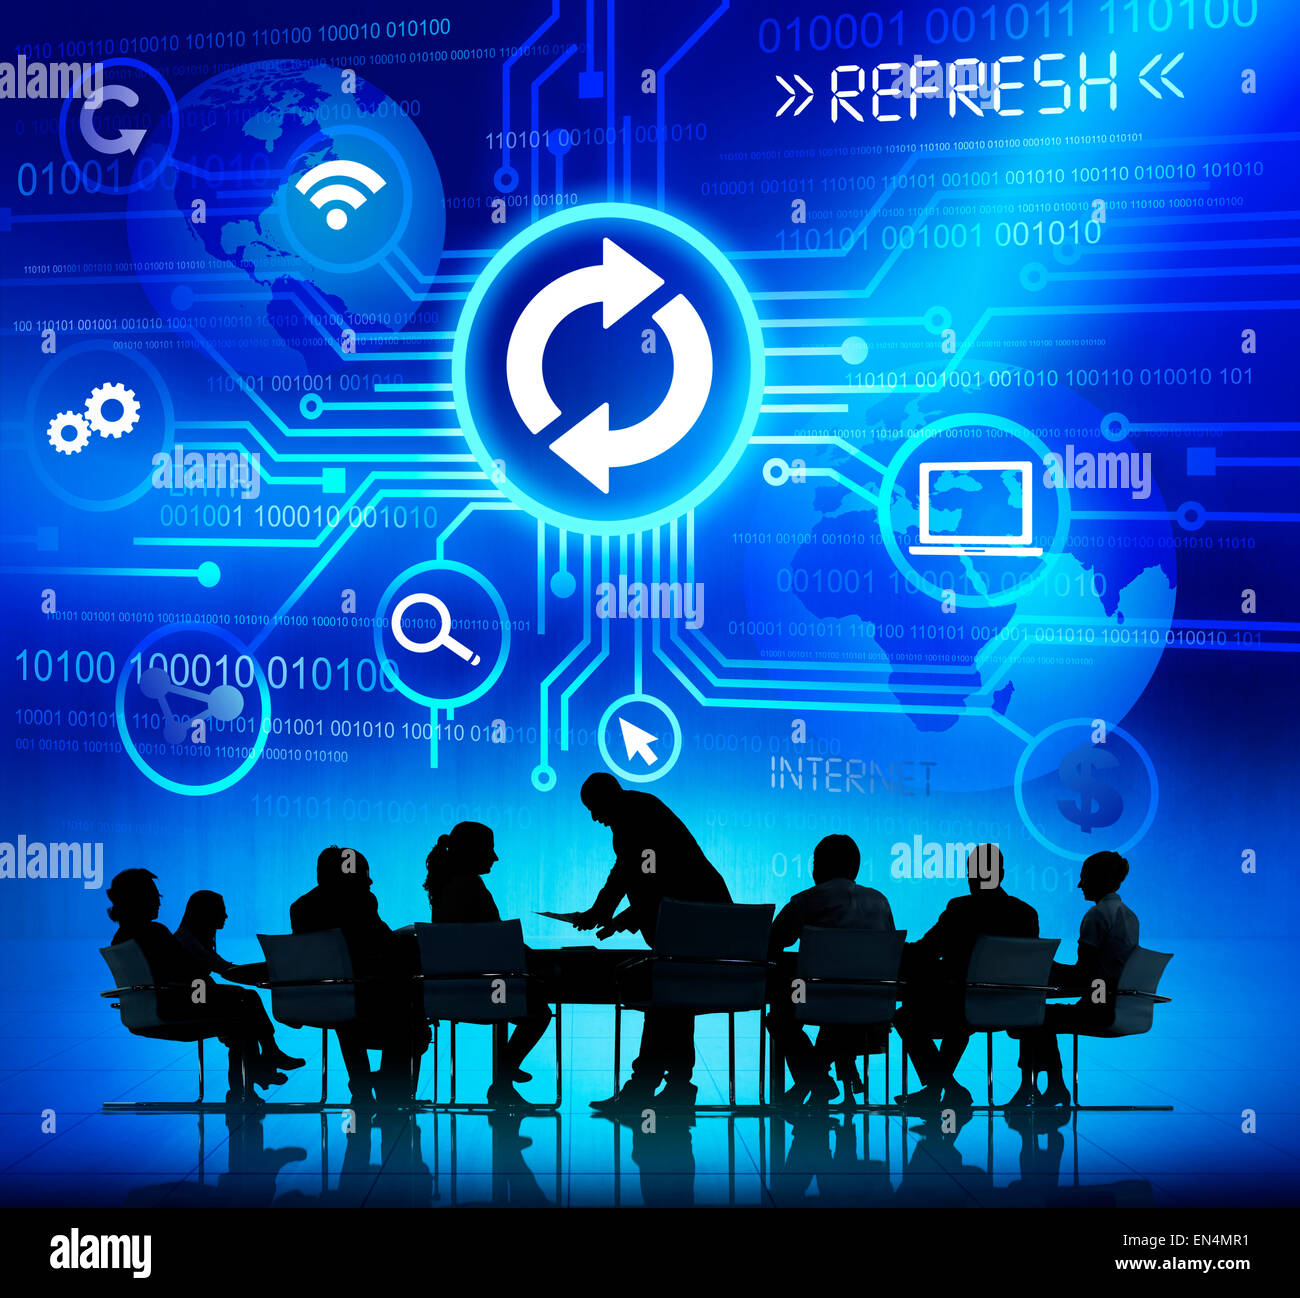 Silhouettes of Business People Working with Computer Concept Symbols Above Stock Photo